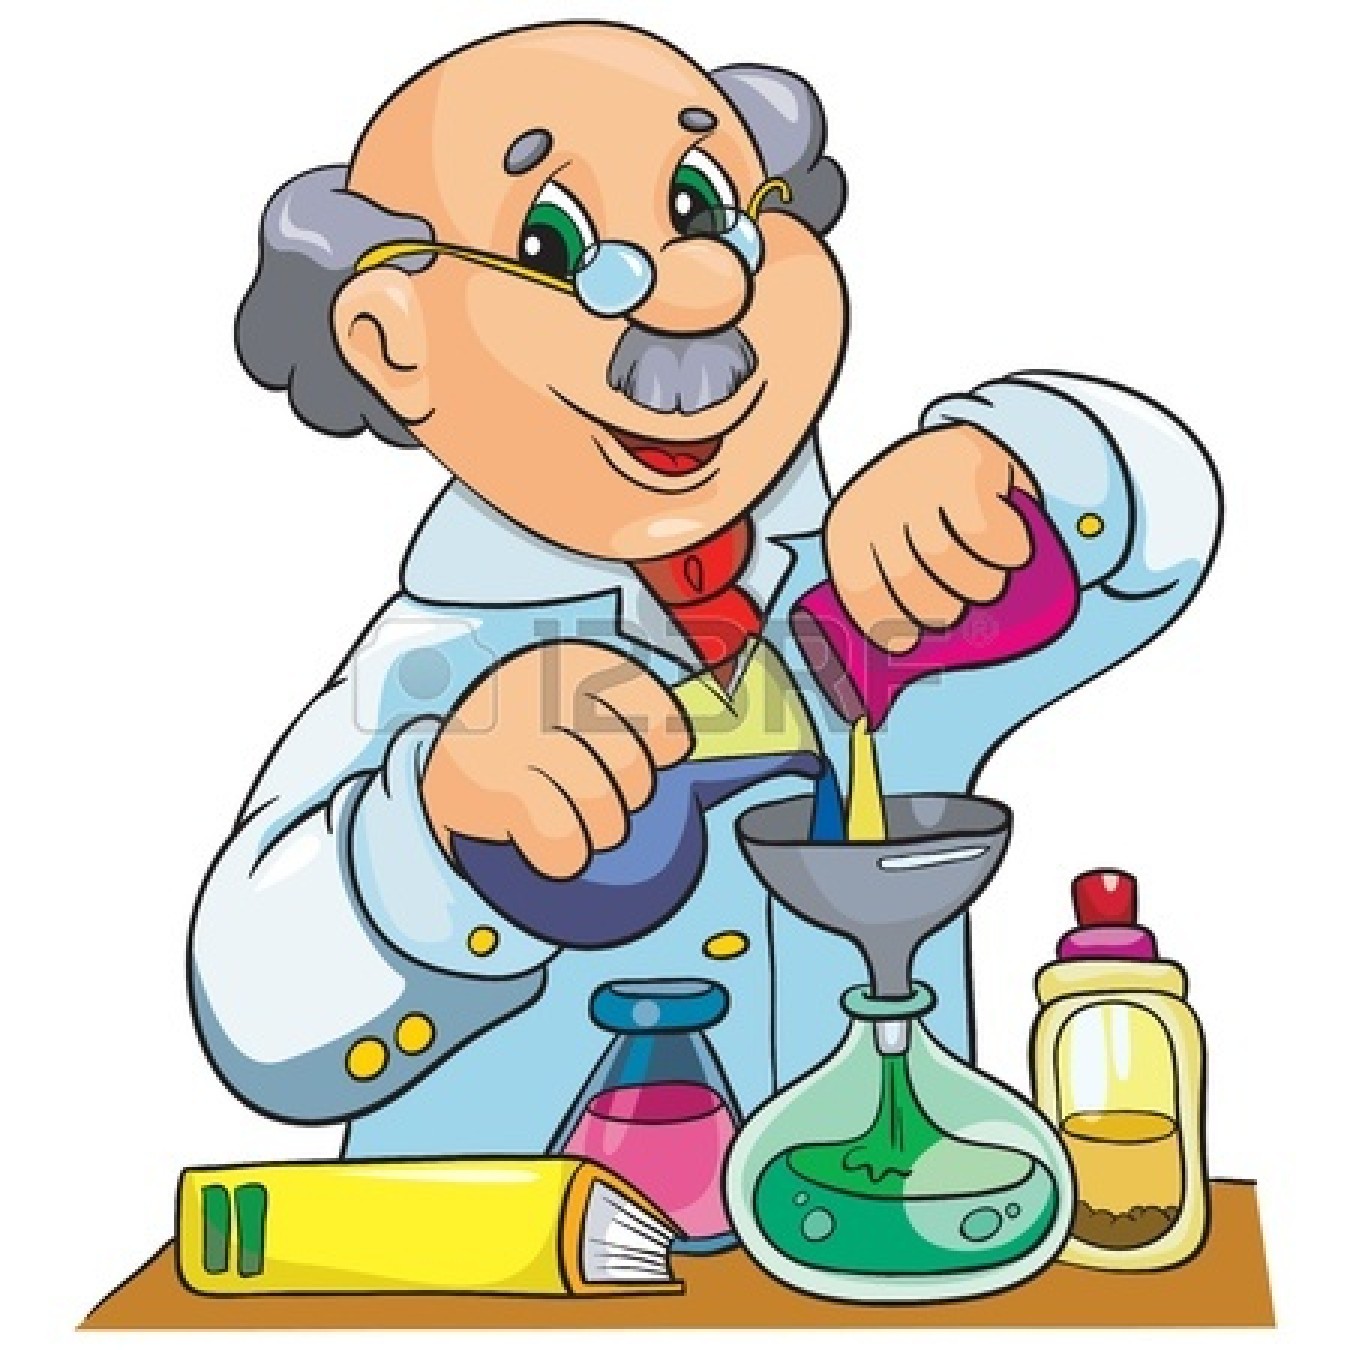 Science Equipment Clipart   Clipart Panda   Free Clipart Images